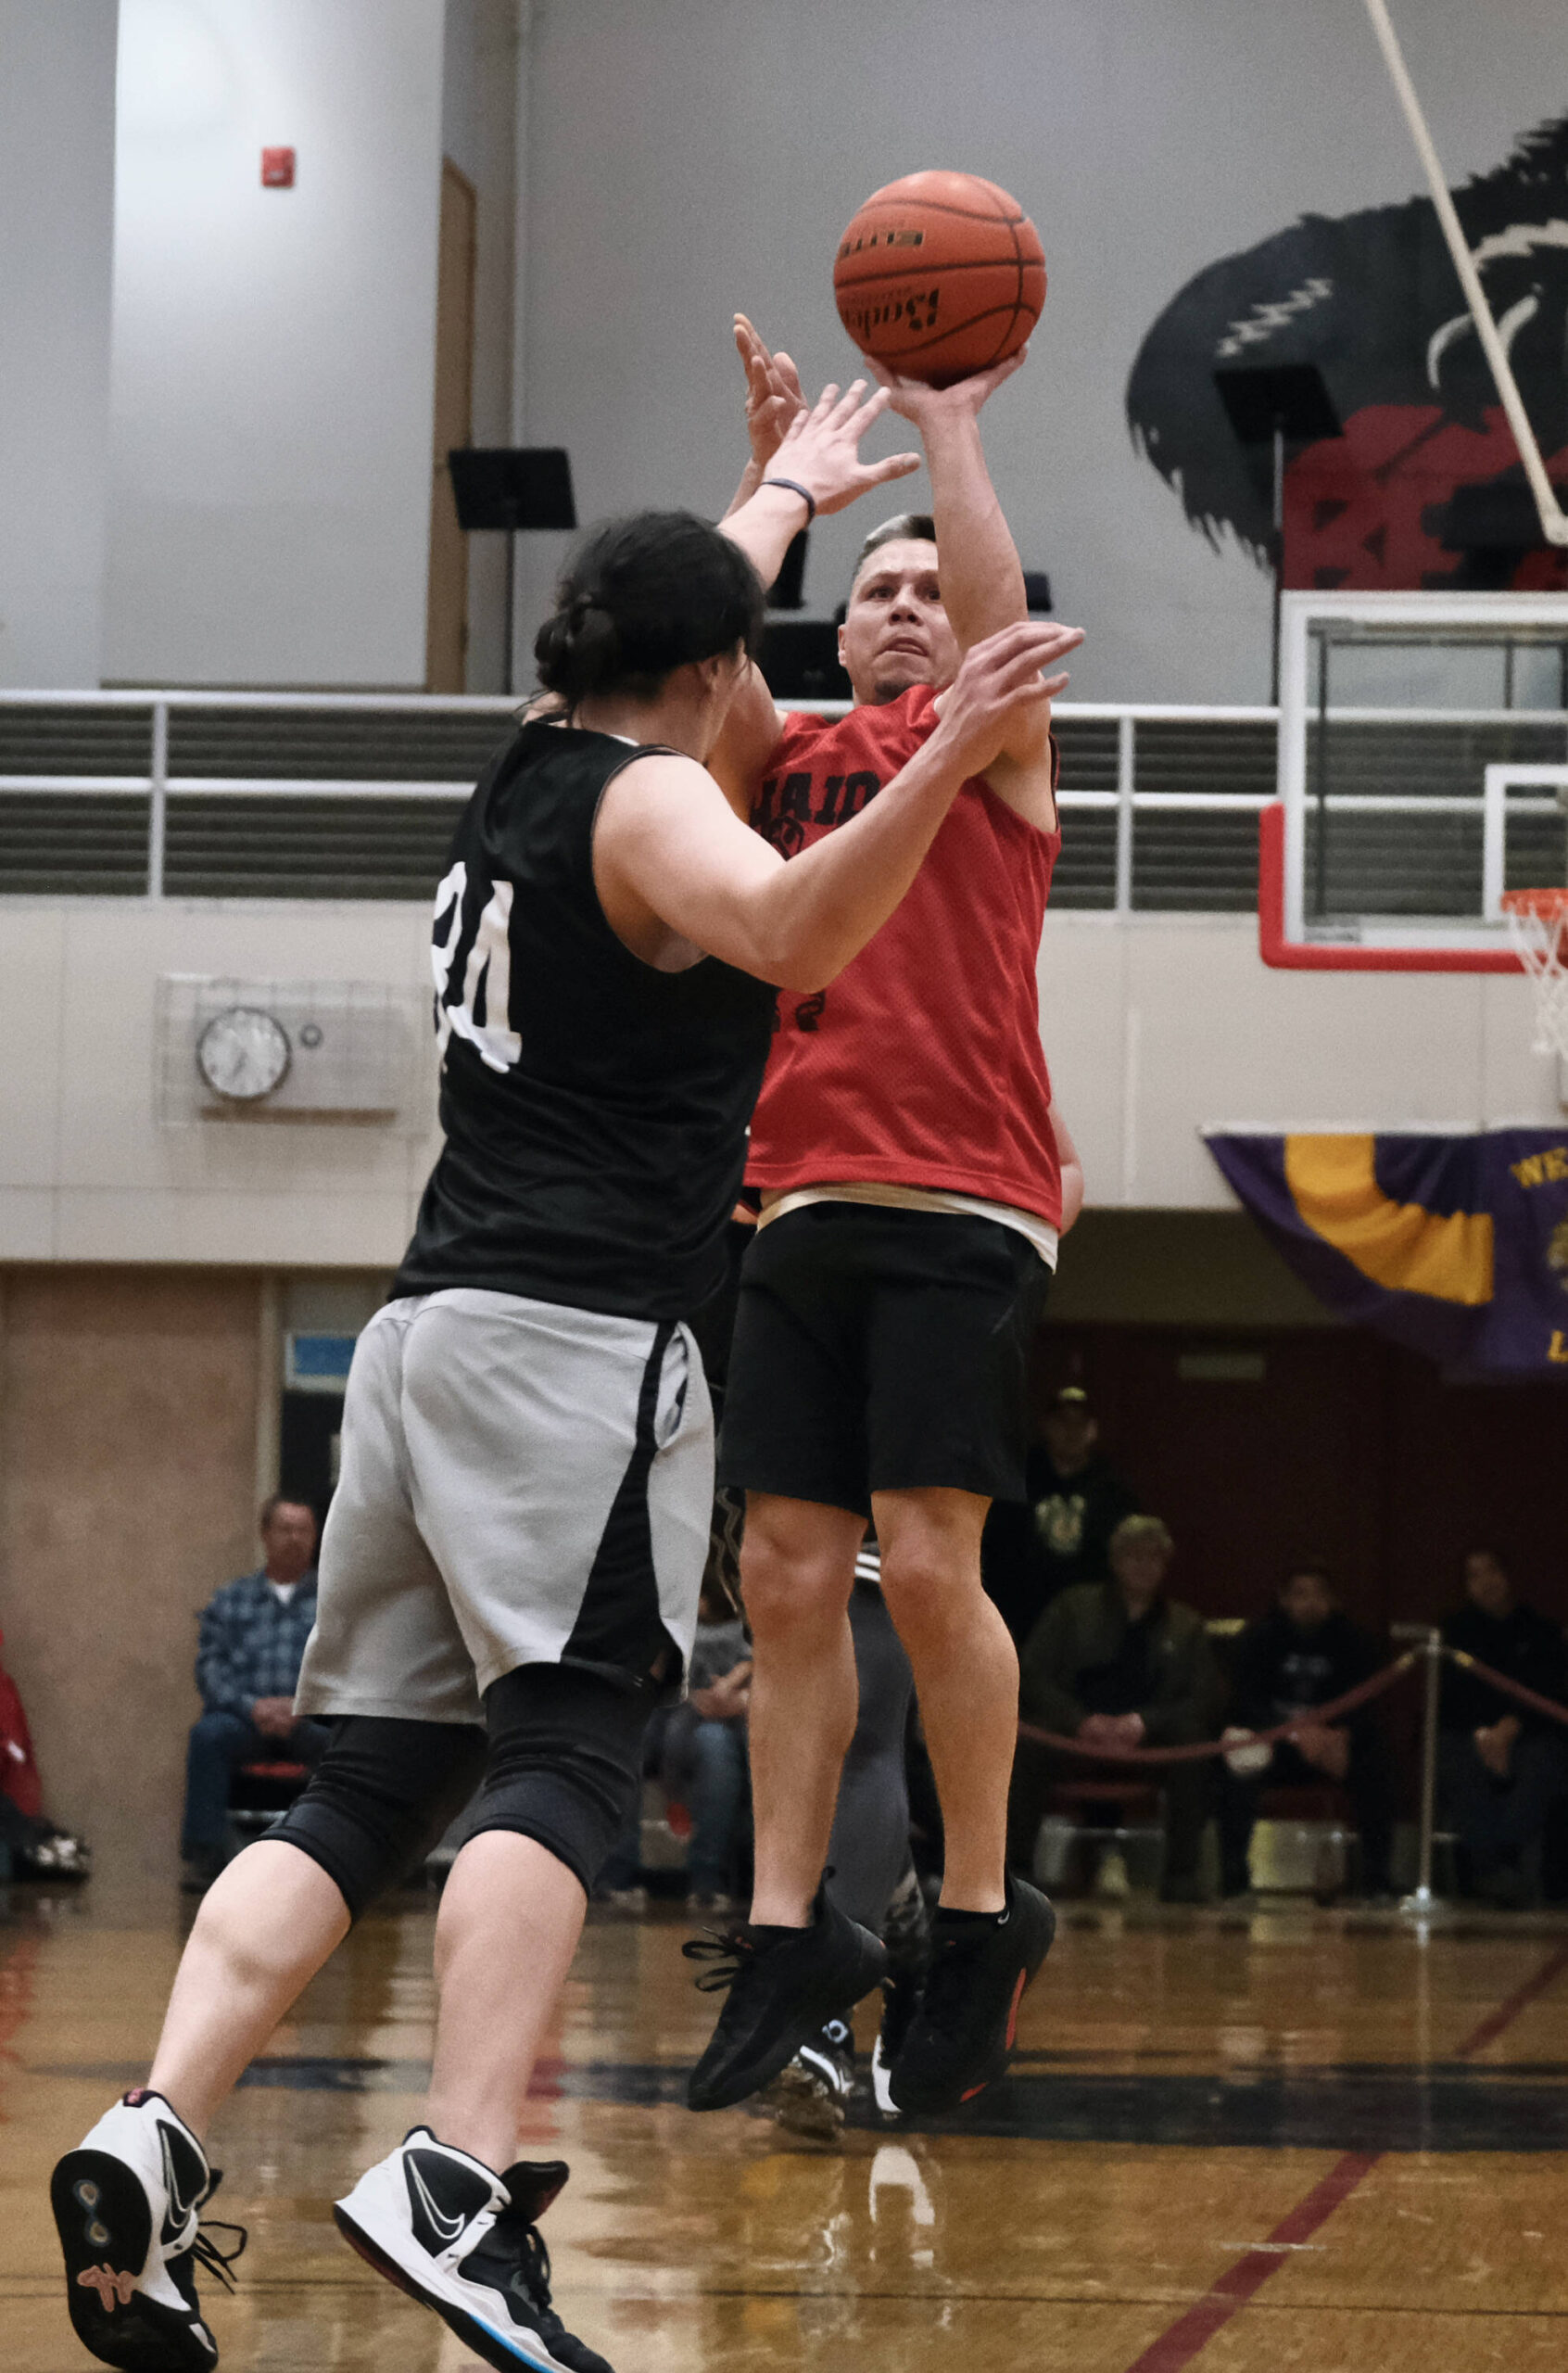 Hydaburg’s Vinnie Edenshaw scores over Angoon’s Duncan O’Brien (34) during B Bracket action during the Juneau Lions Club 74th Annual Gold Medal Basketball Tournament, Sunday, March 19, at the Juneau-Douglas High School: Yadaa.at Kalé gymnasium. (Klas Stolpe / For the Juneau Empire)